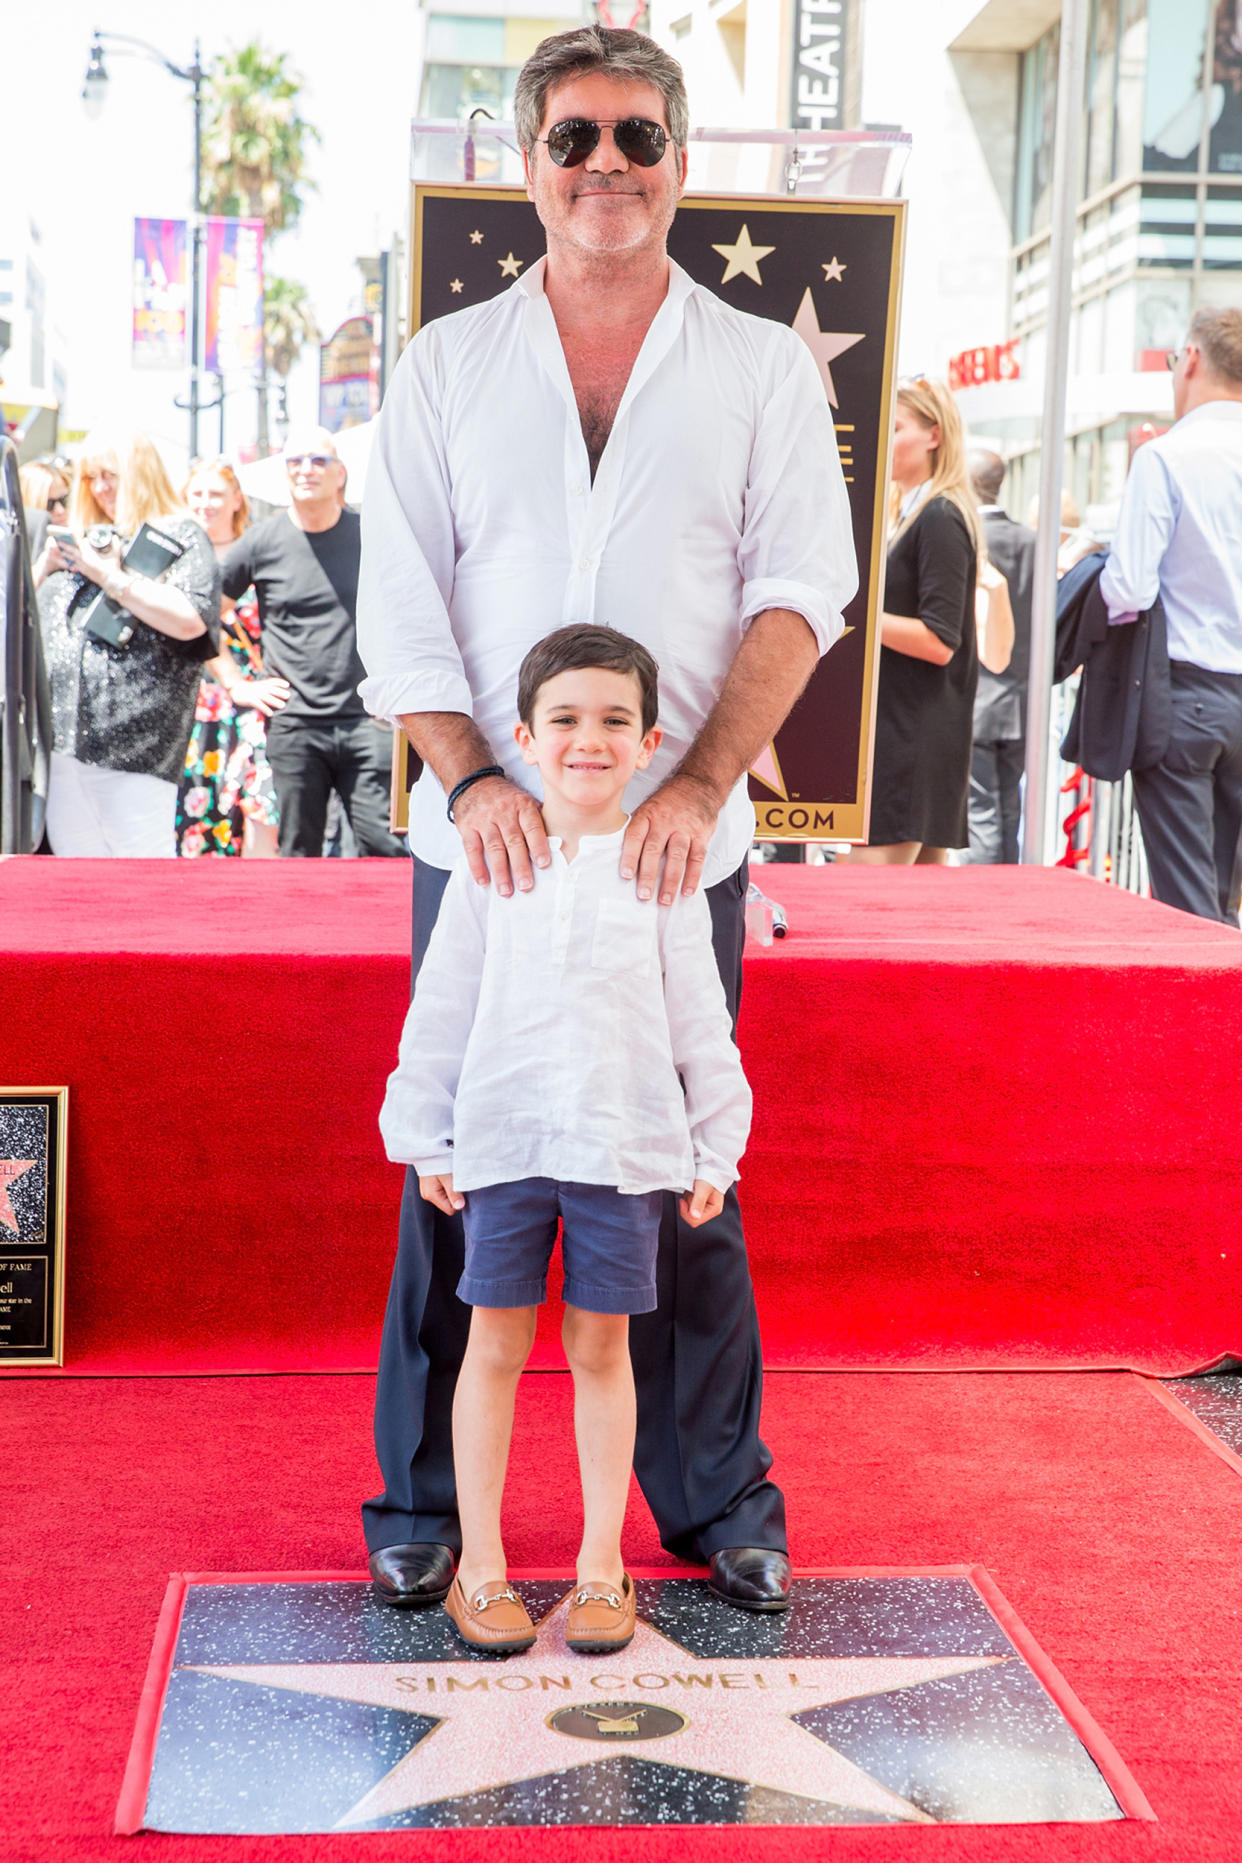 Simon Cowell Honored With Star On The Hollywood Walk Of Fame (Rich Fury / Getty Images)